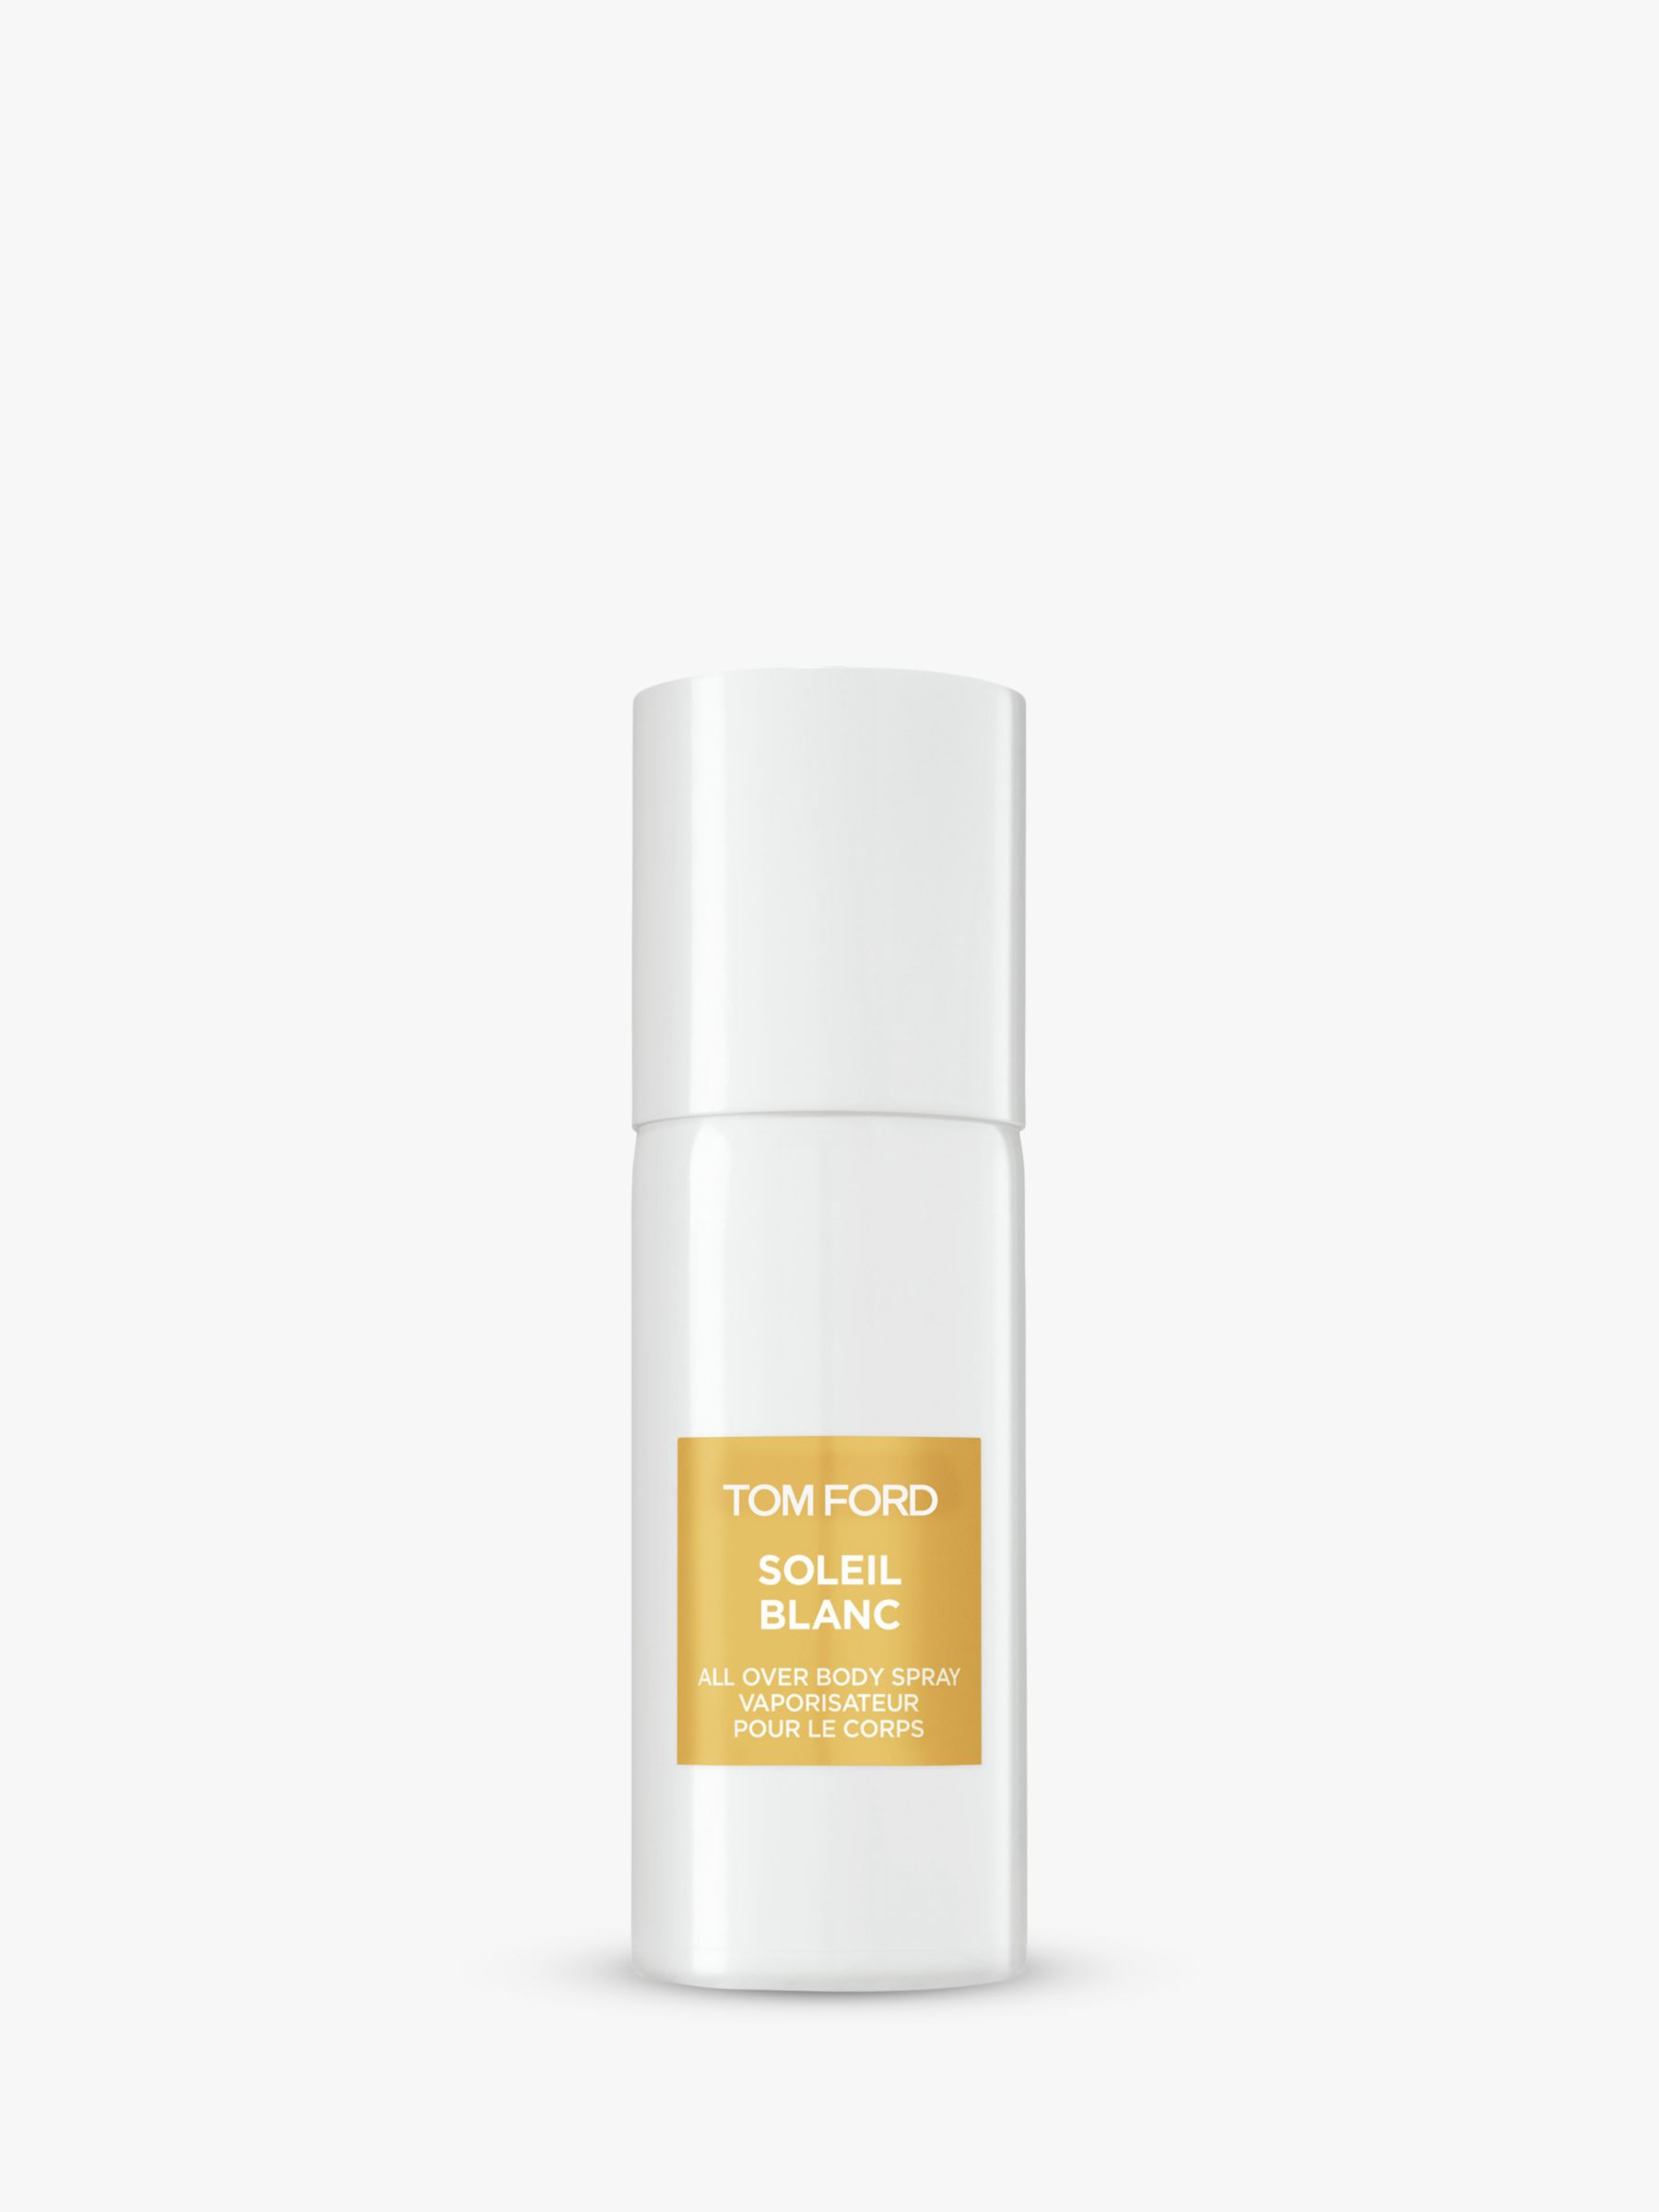 TOM FORD Private Blend Soleil Blanc All Over Body Spray, 150ml at John  Lewis & Partners